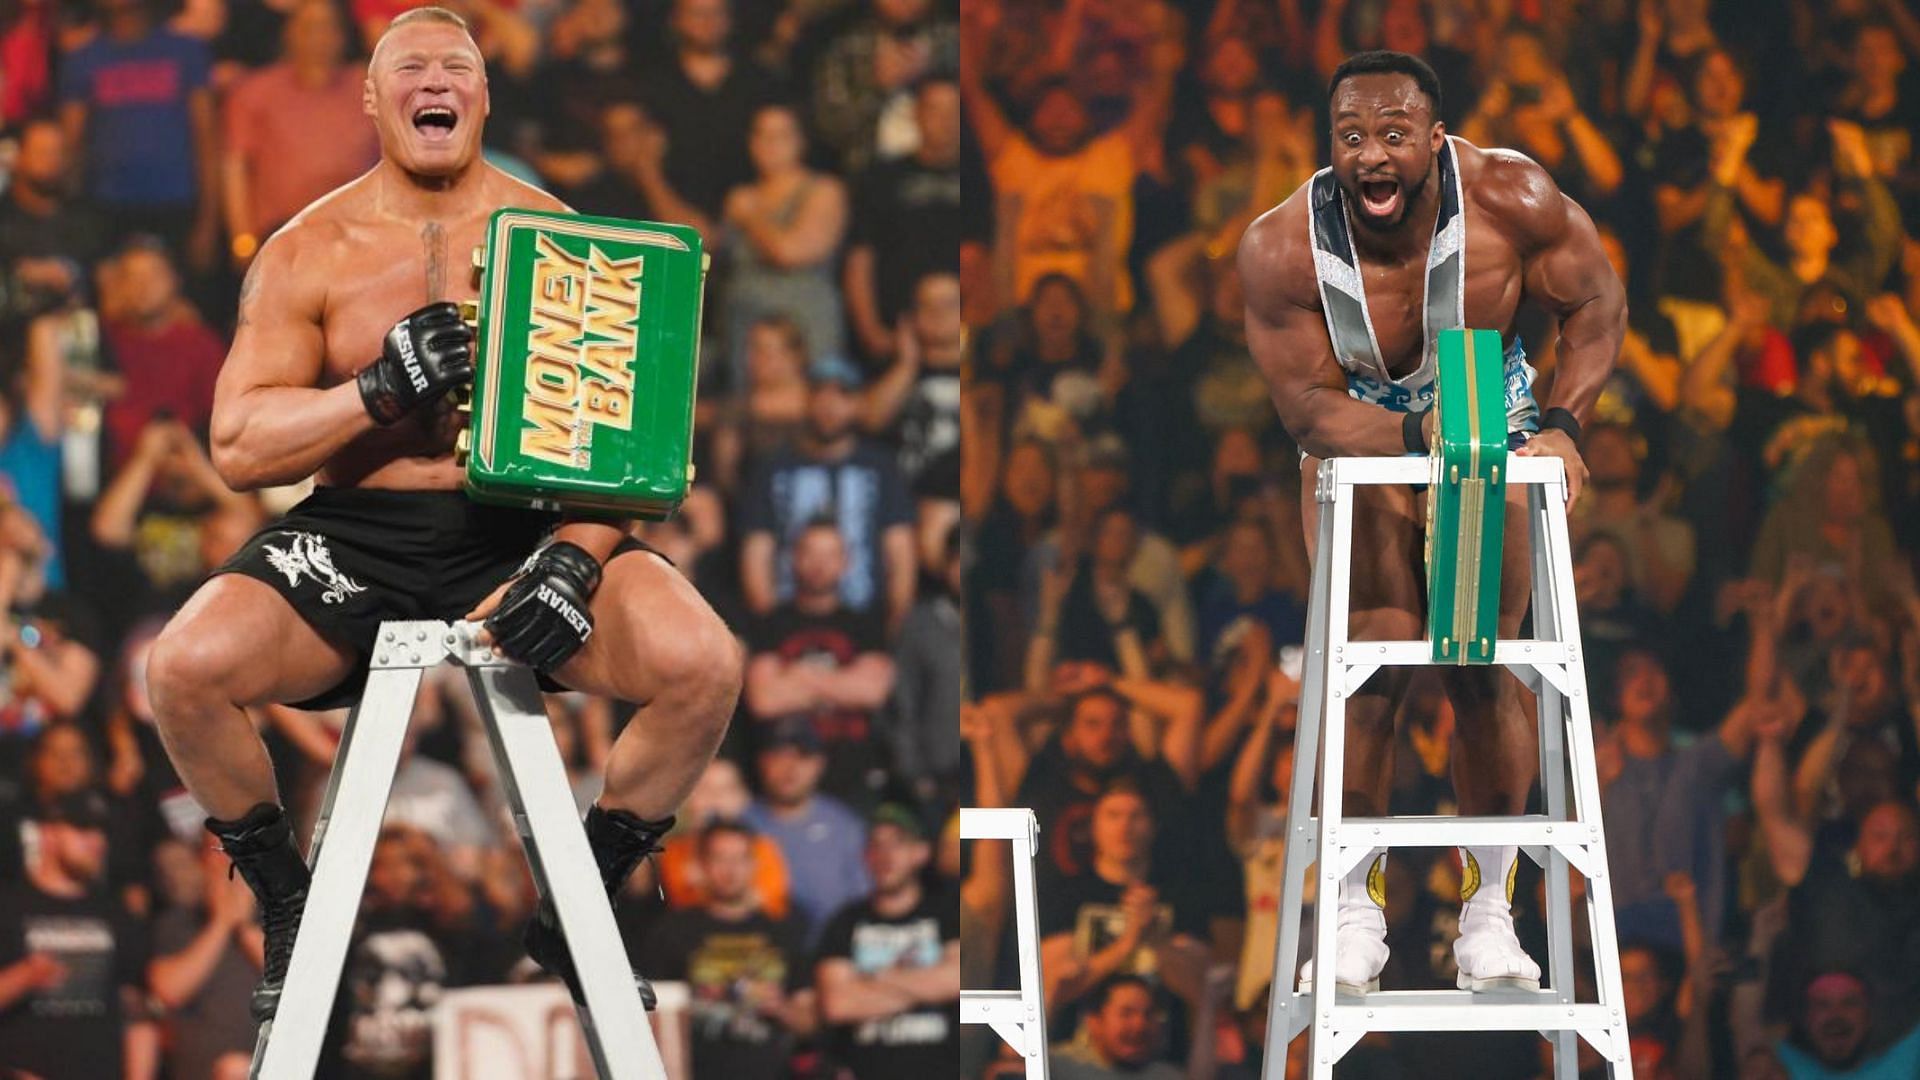 Big E and Brock Lesnar celebrate their respective MITB wins